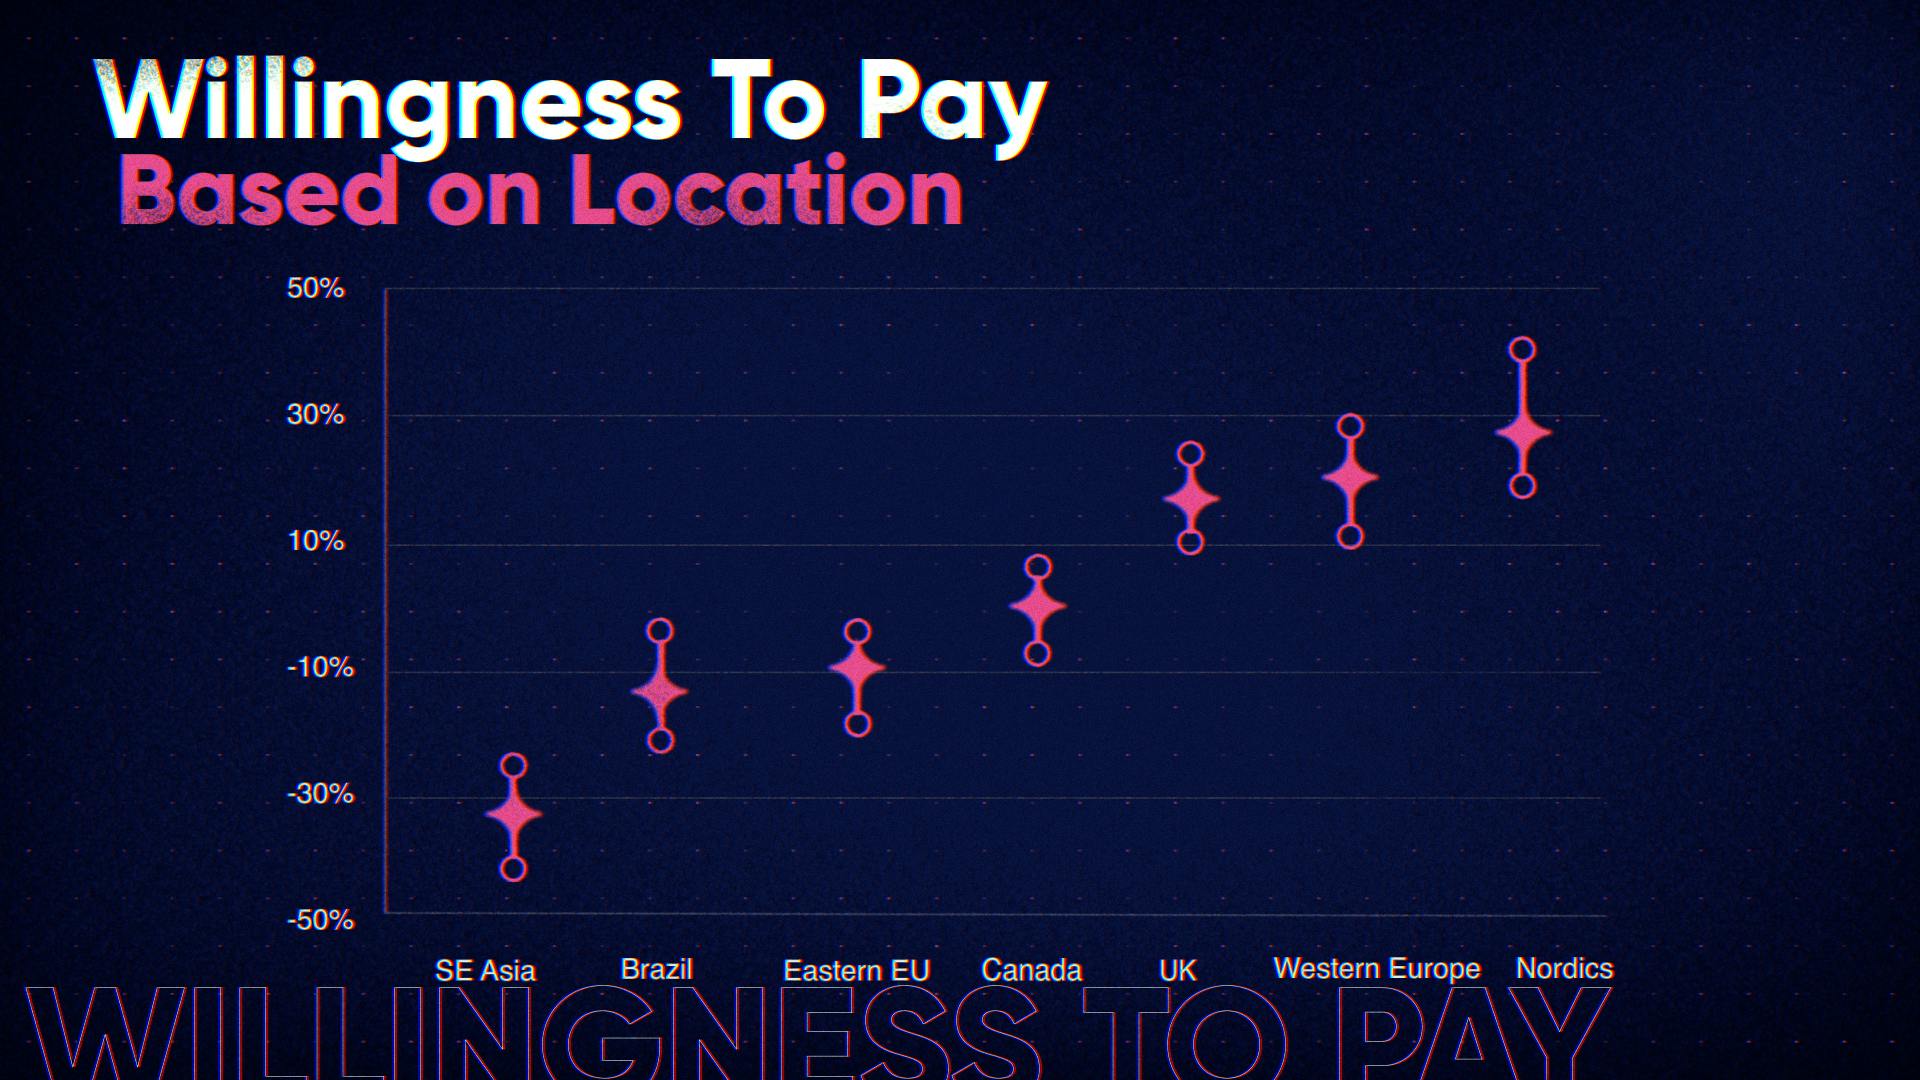 Willingness to Pay based on location